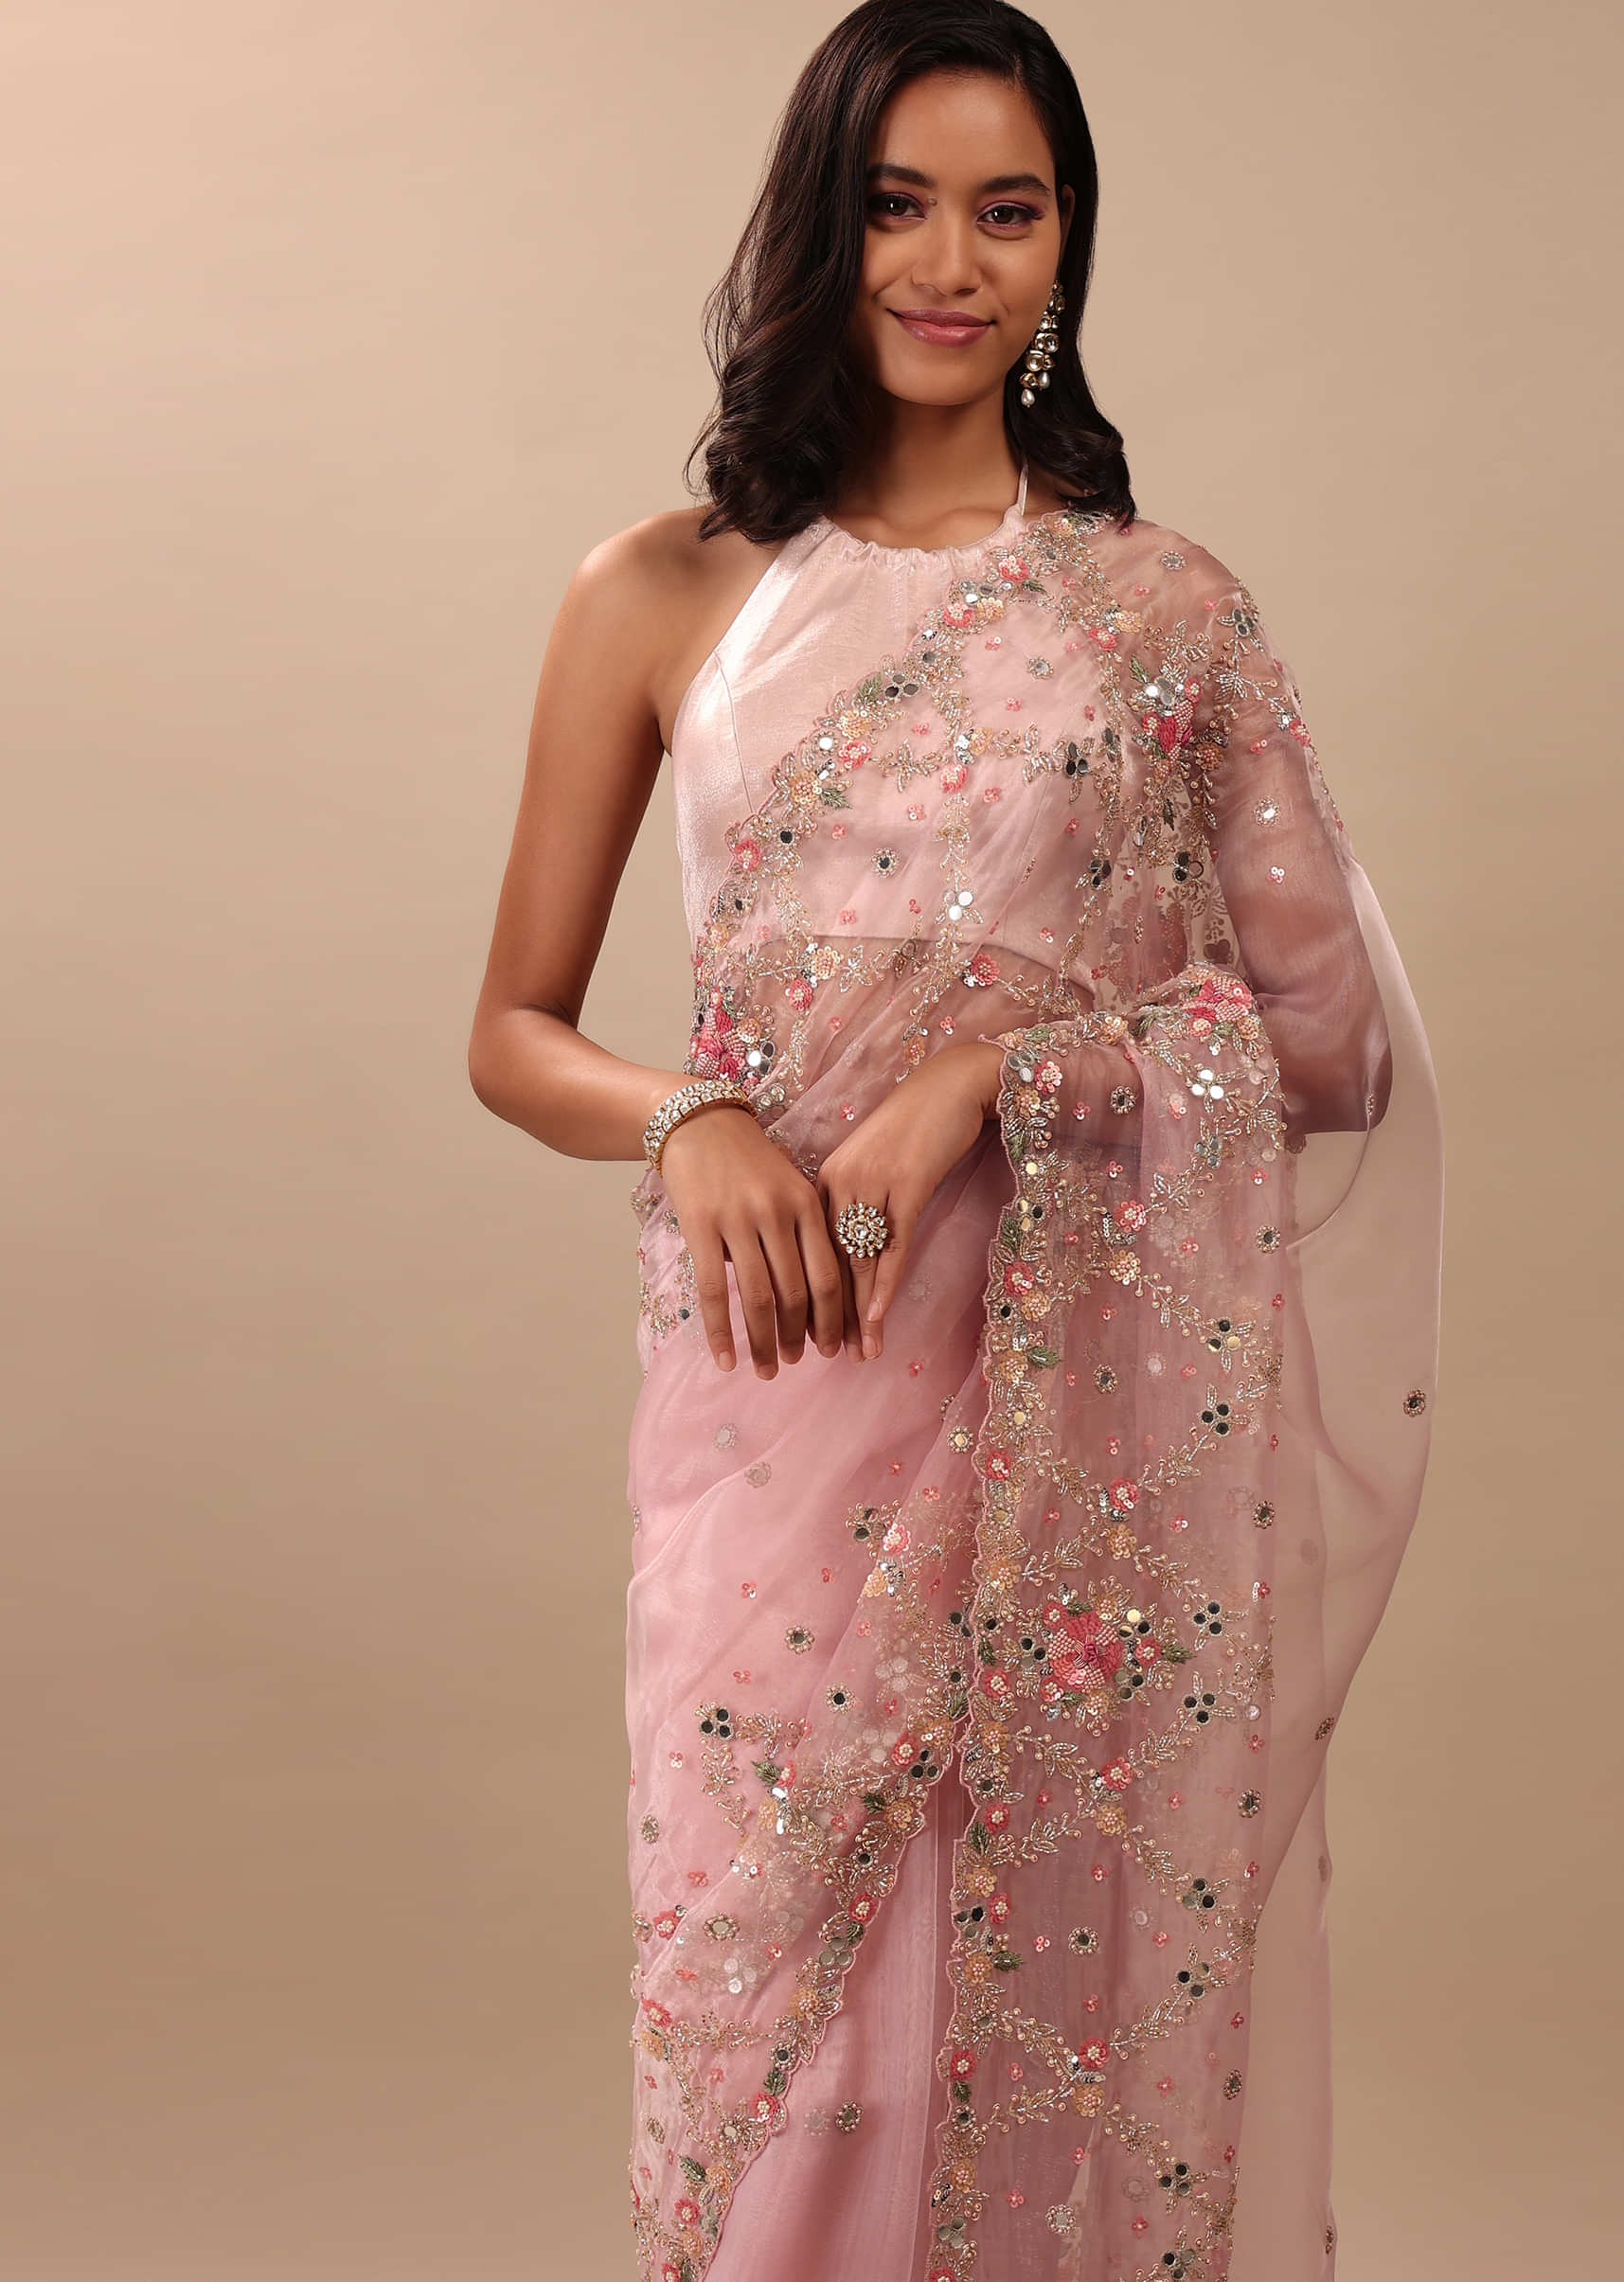 https://newcdn.kalkifashion.com/media/catalog/product/l/o/lotus_pink_saree_in_organza_with_floral_mirror_embroidery_4_.jpg?aio-w=500